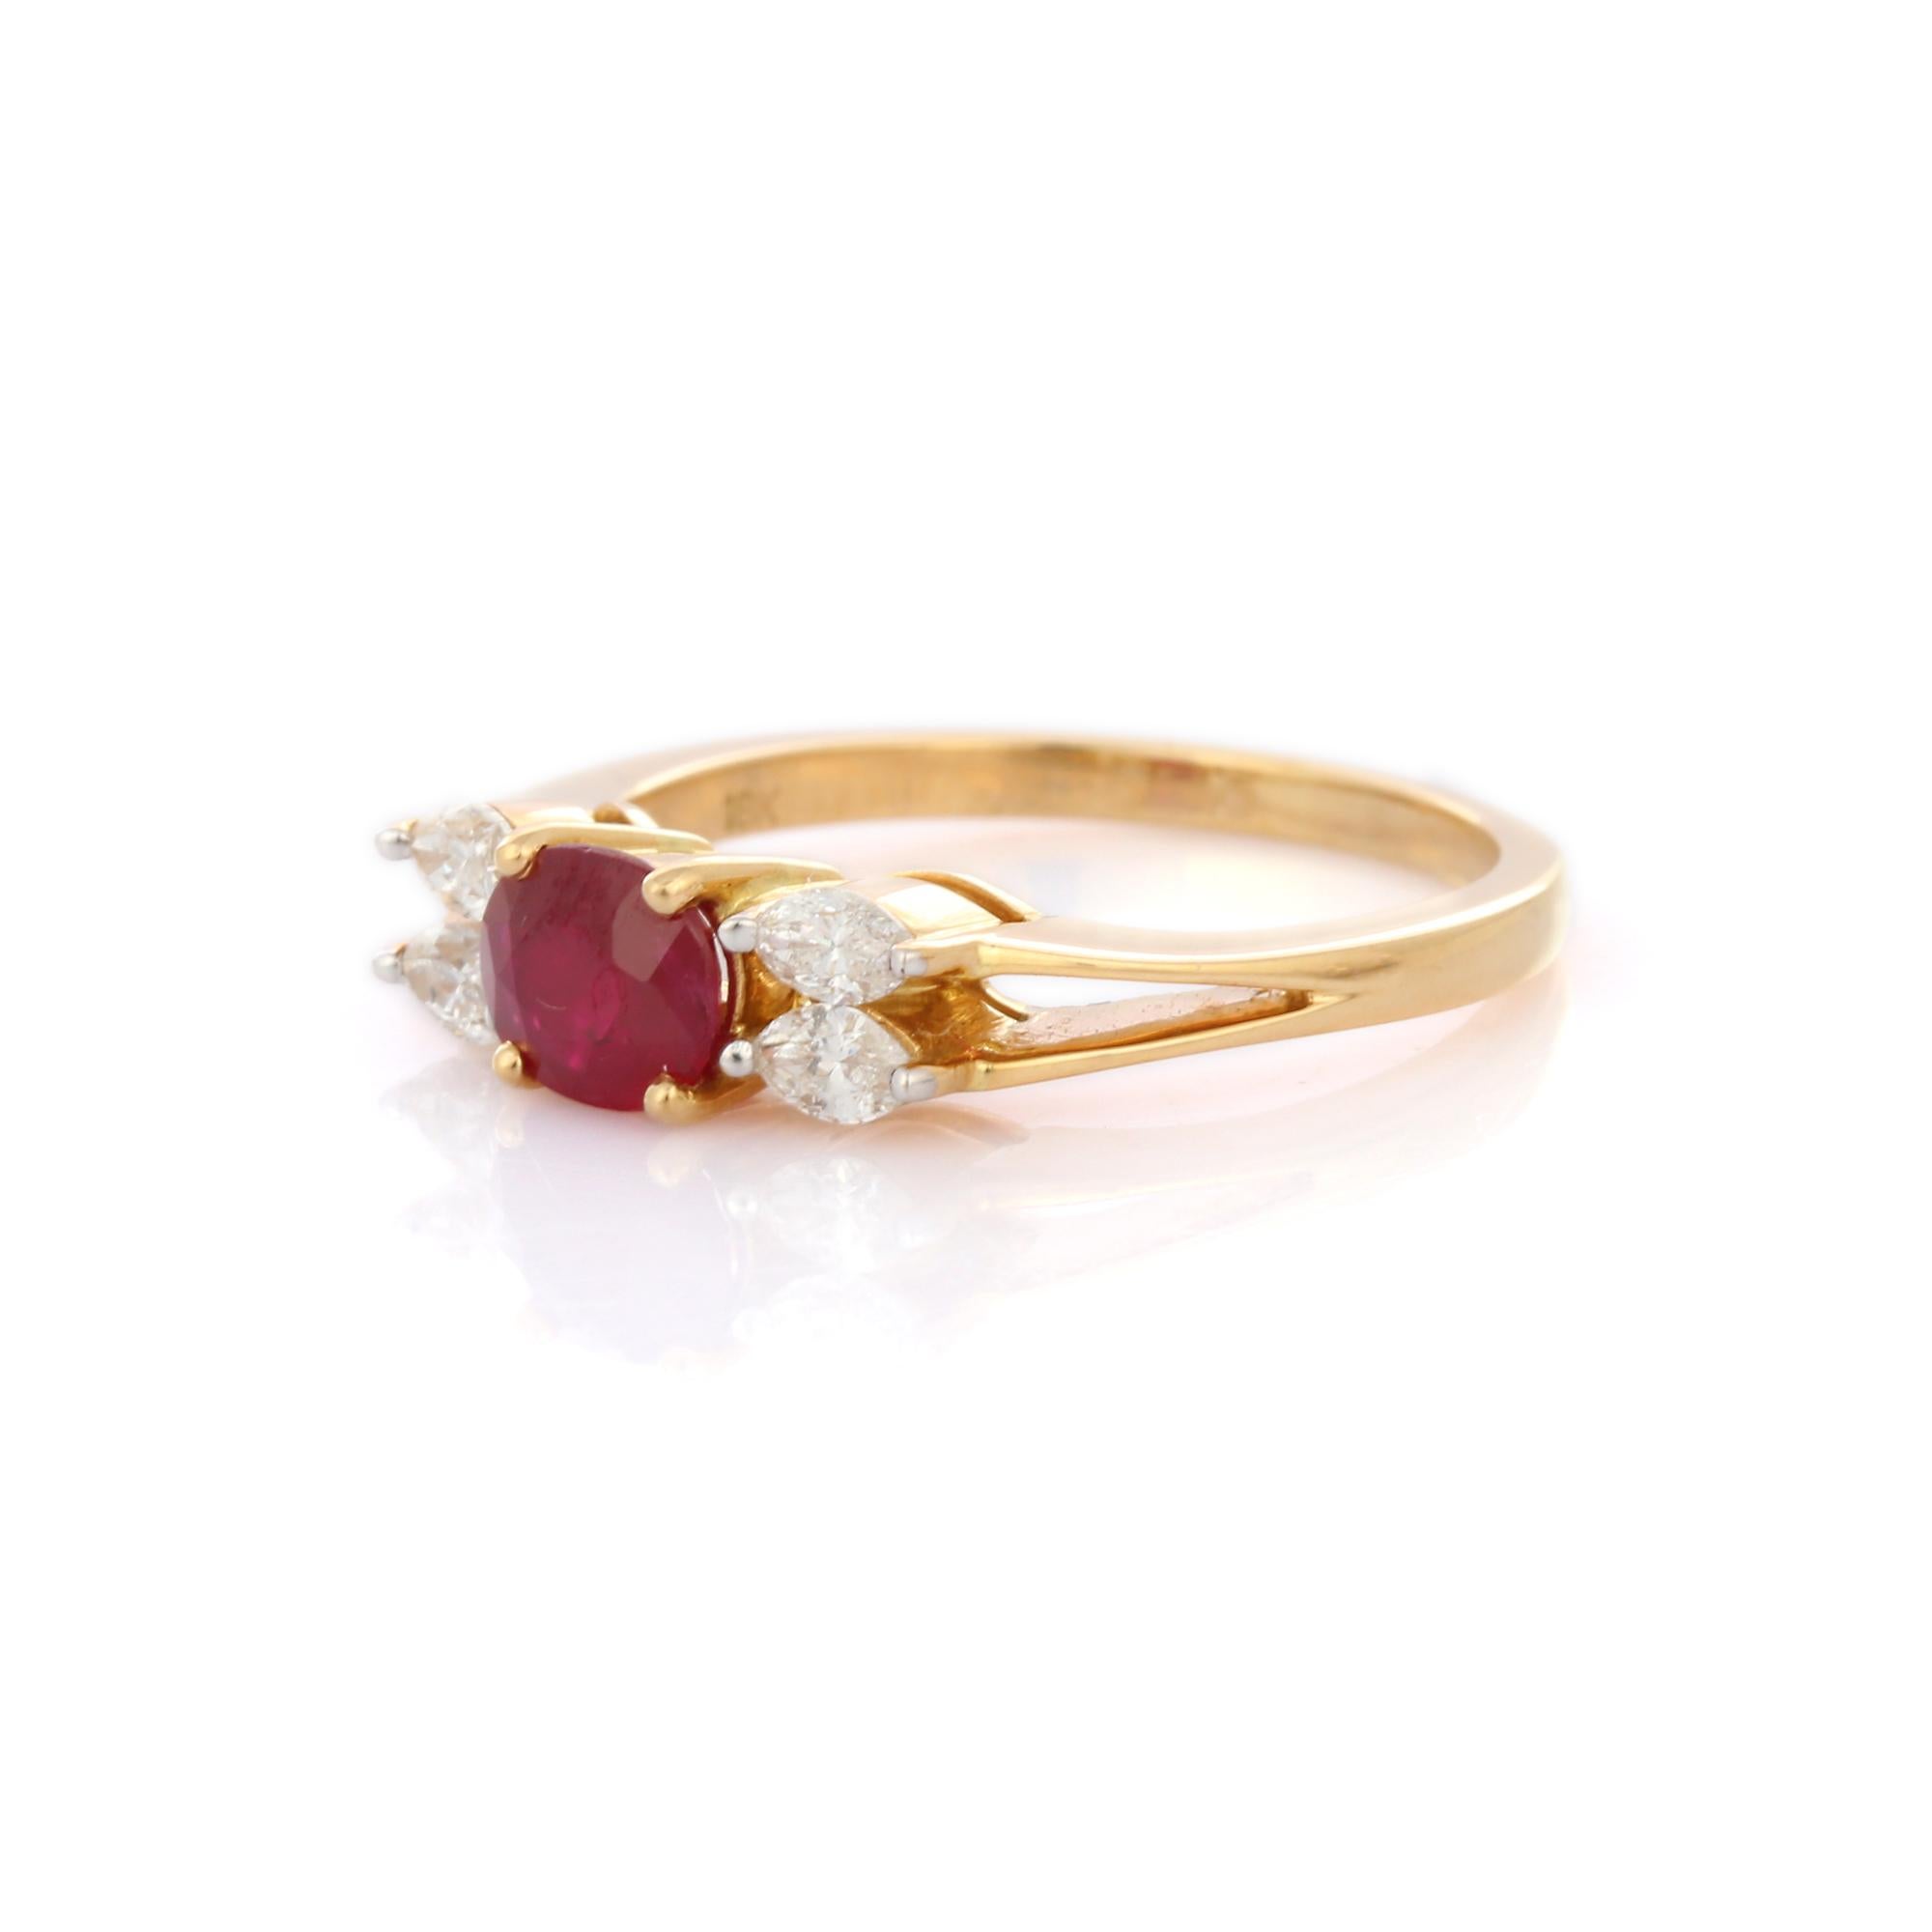 For Sale:  Astonishing Oval Cut Ruby Gemstone and Diamond Ring in 18K Solid Yellow Gold  3